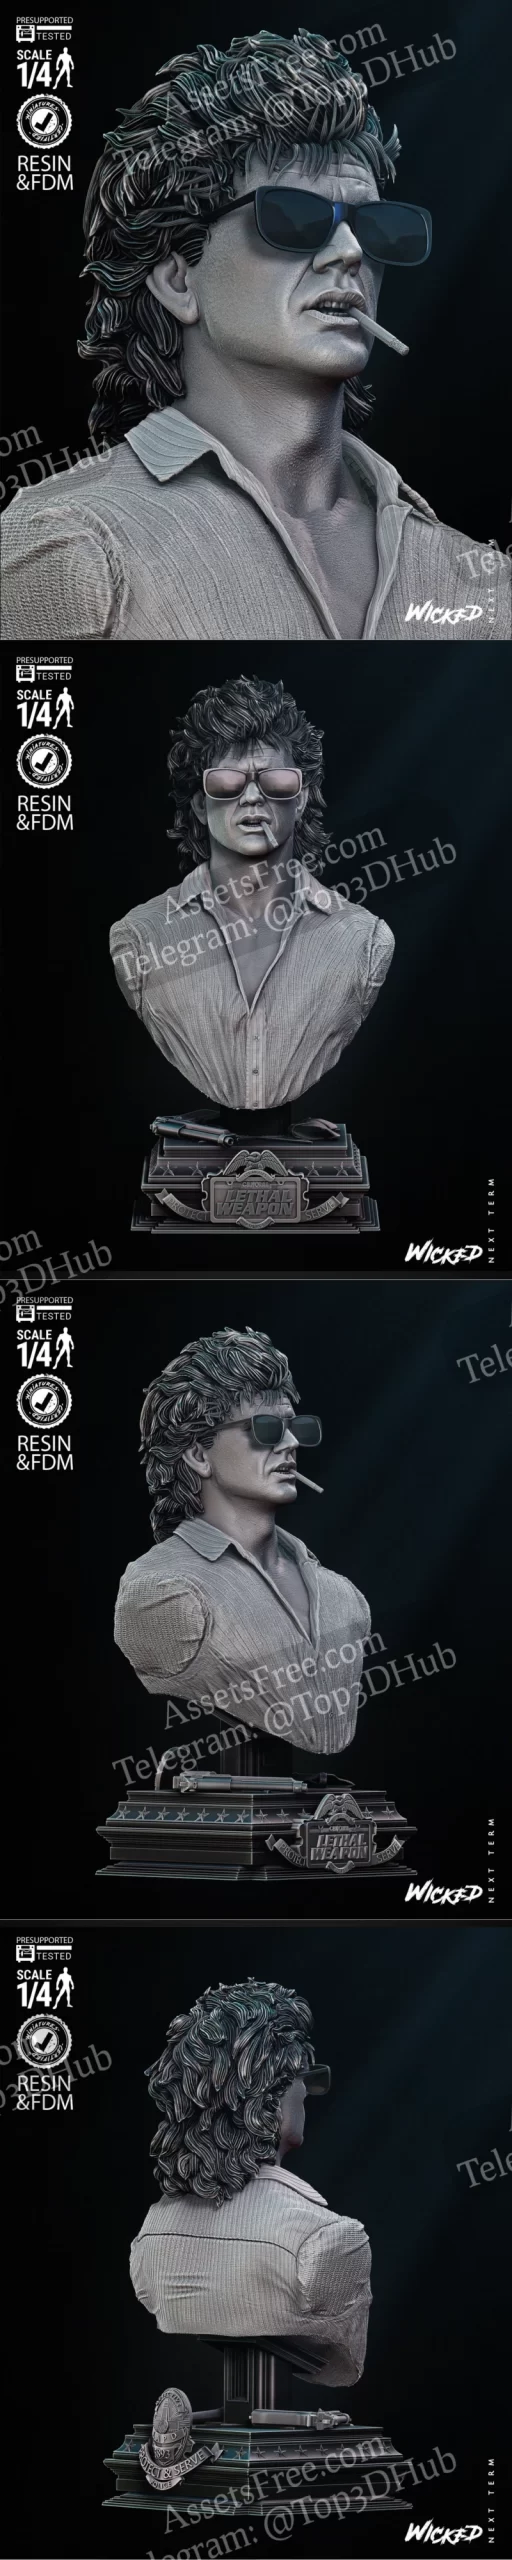 Riggs Bust Portrait - Lethal Weapon